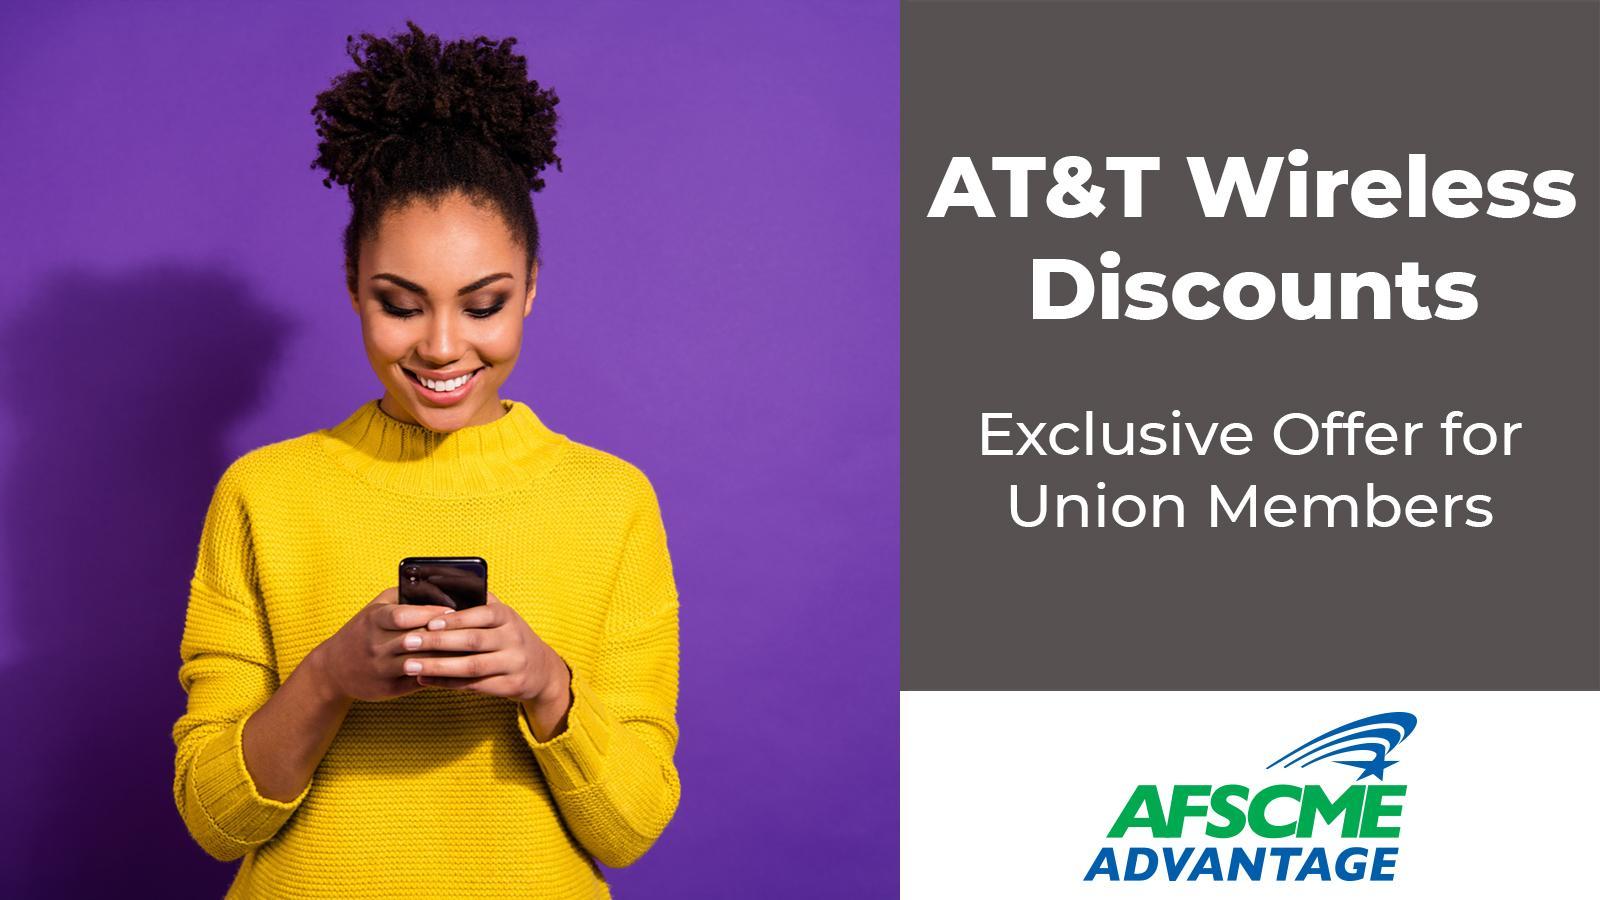 AT&T Wireless Member Benefit